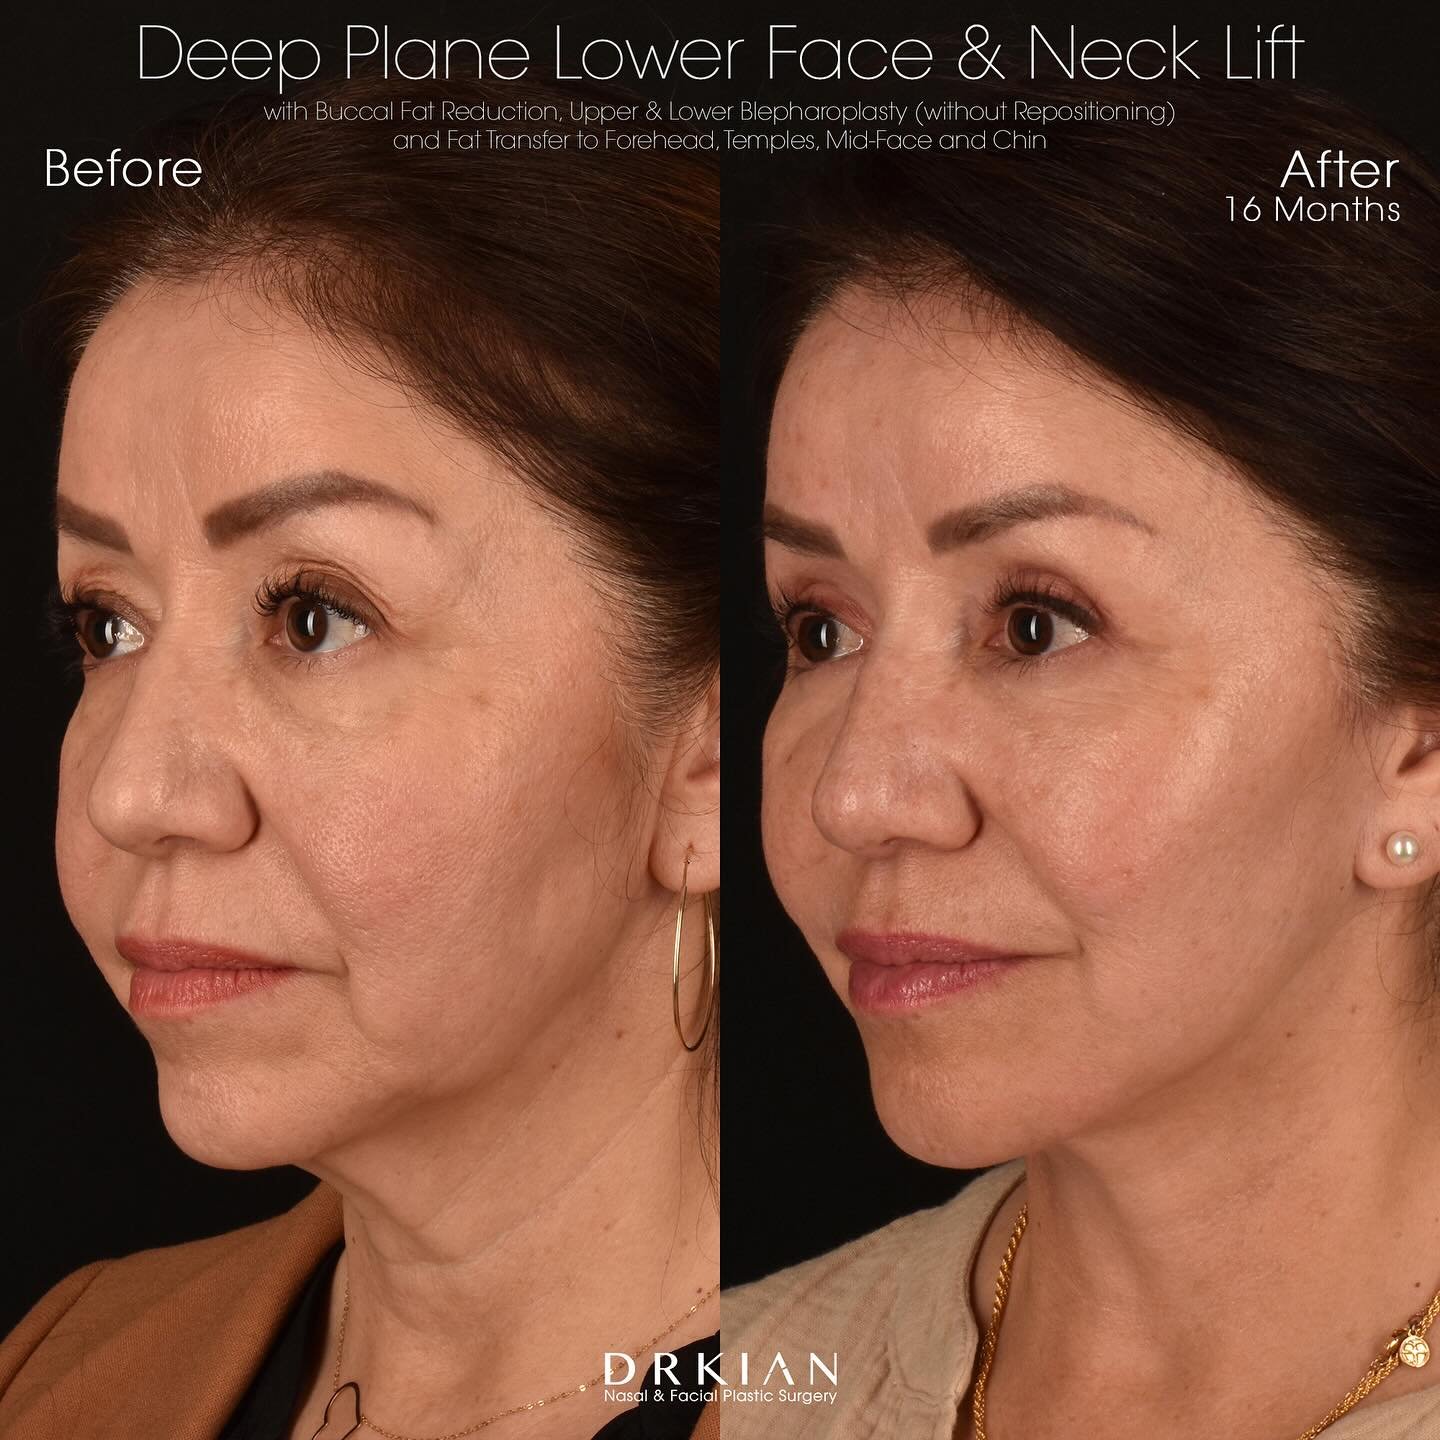 Often, the most beautiful transformations are achieved through combining a series of small (or maybe even &lsquo;subtle&rsquo;) improvements that together will produce a stunning (and more natural-looking) outcome. Patients who are interested in unde